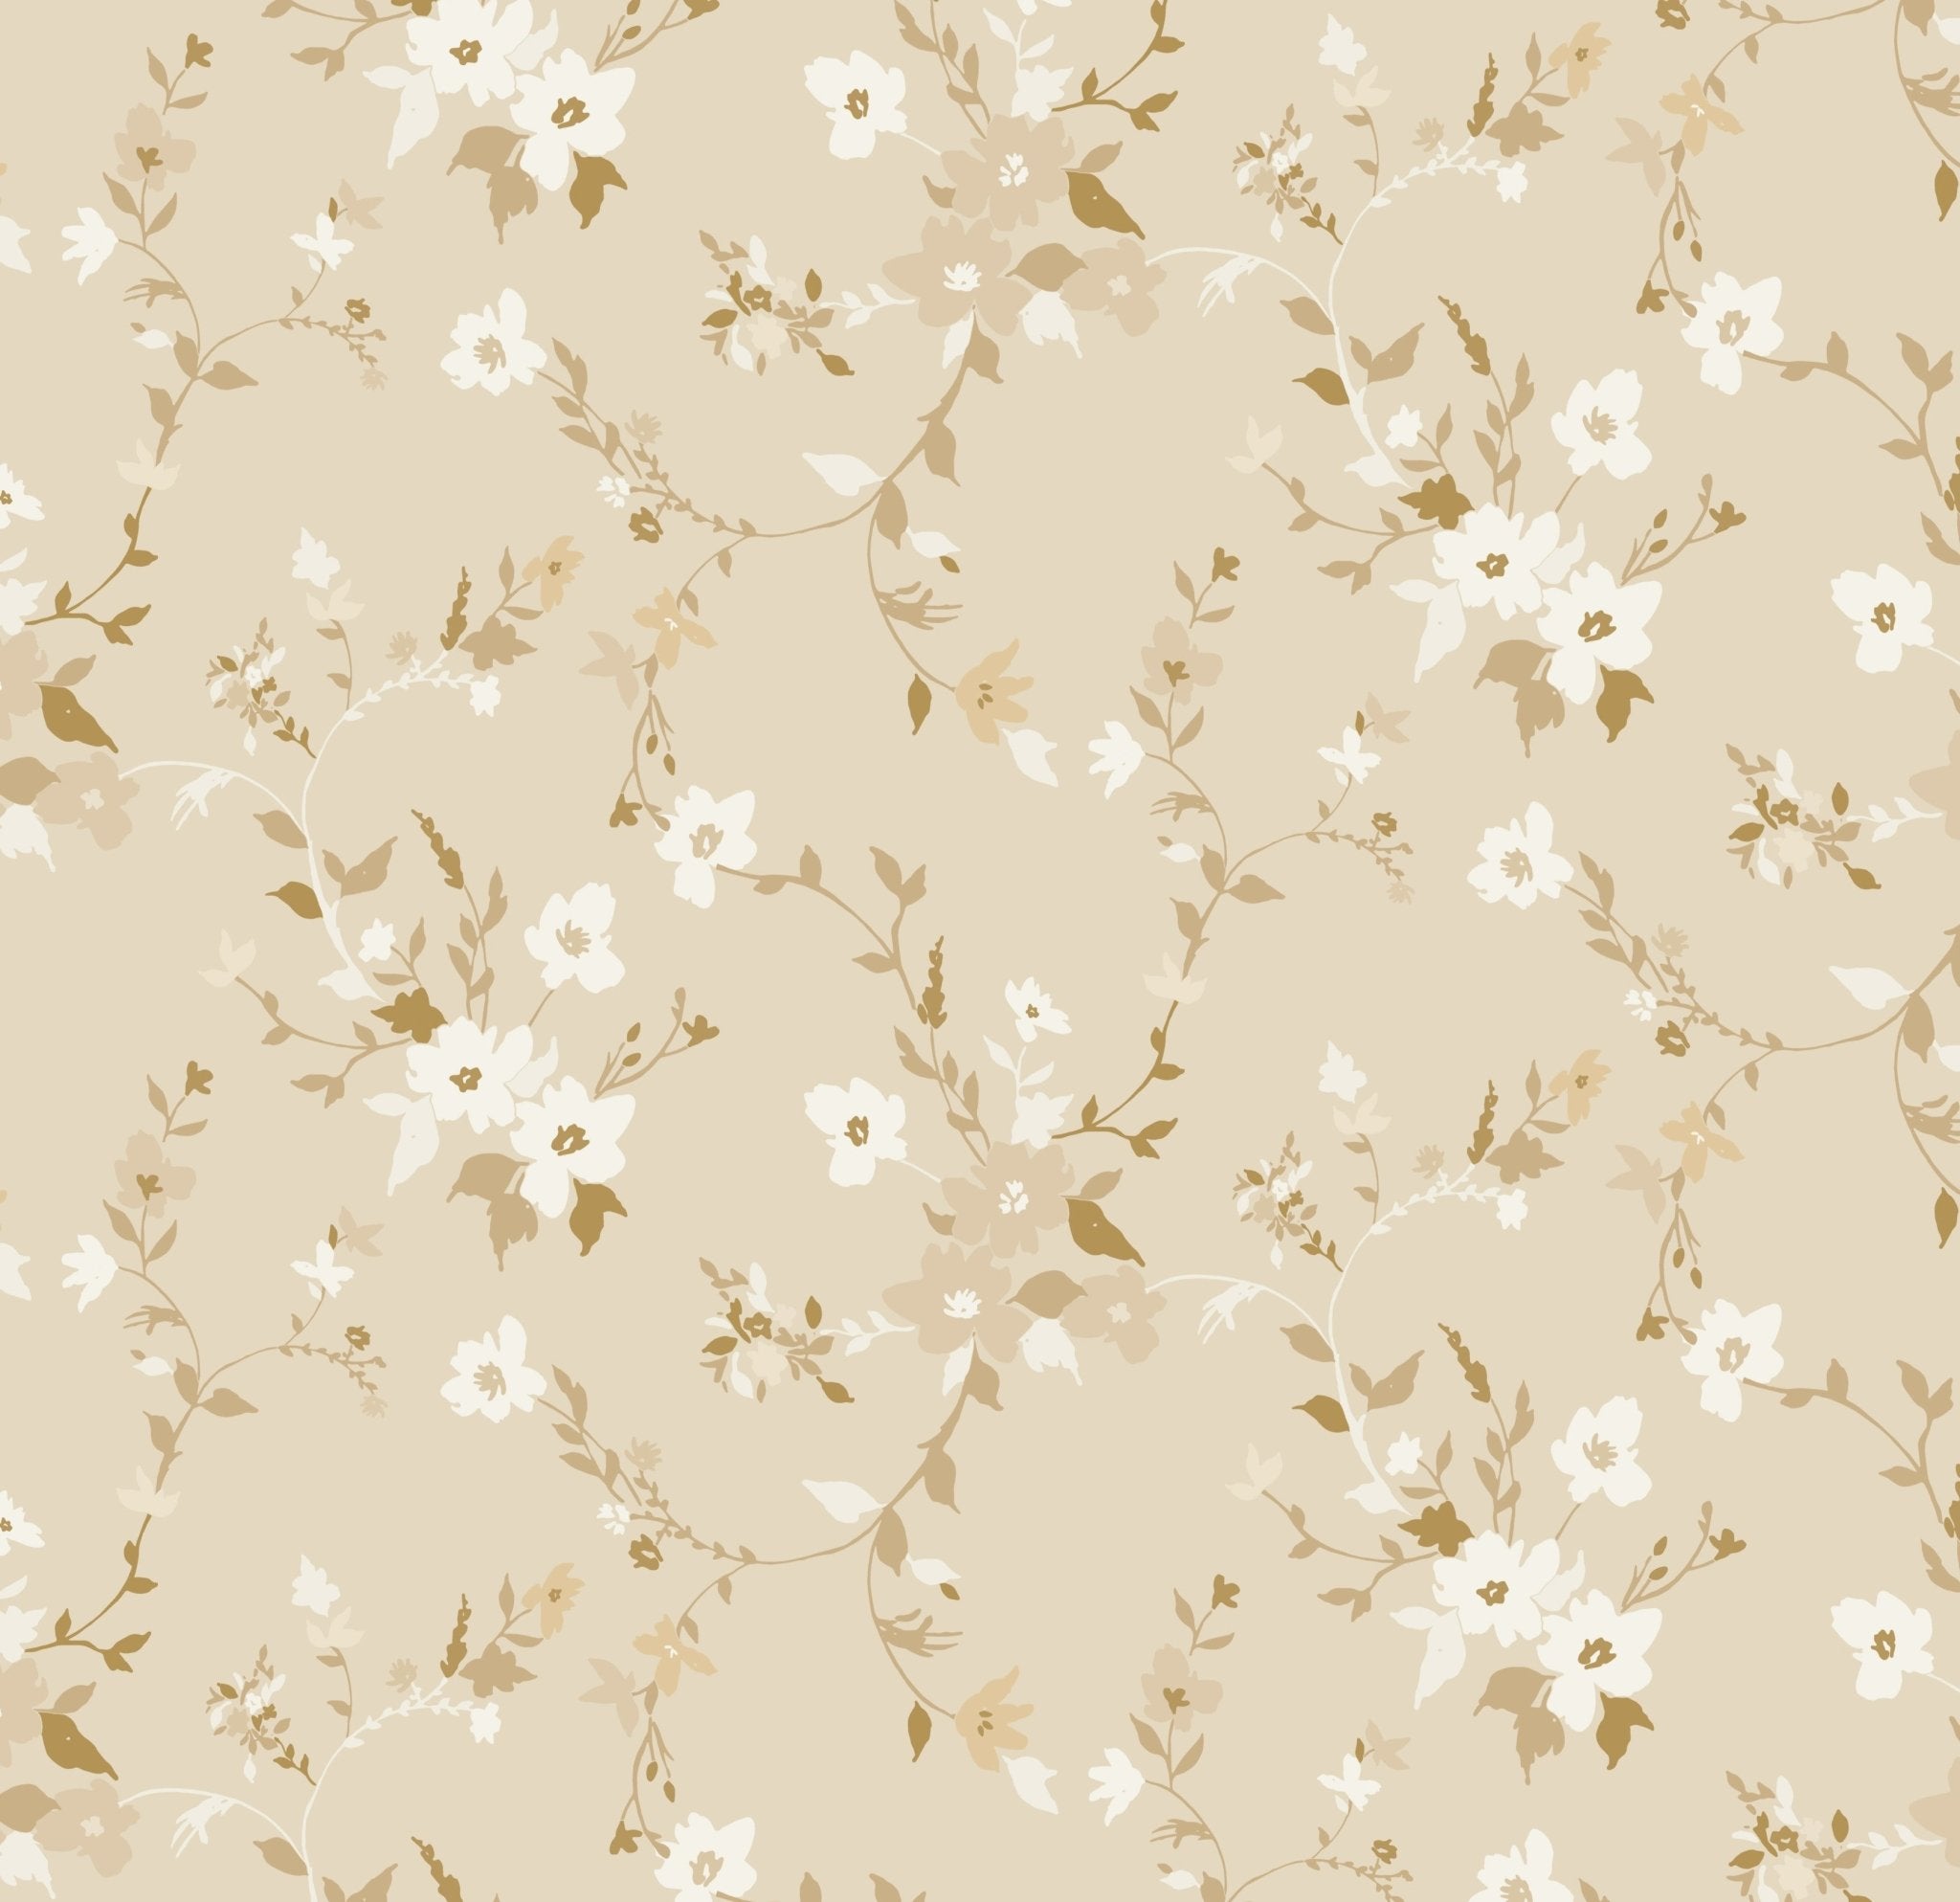 Elegant wallpaper design with cream and golden-hued flowers and delicate branches sprawling across a light beige background, offering a rich and sophisticated floral motif for interior decor